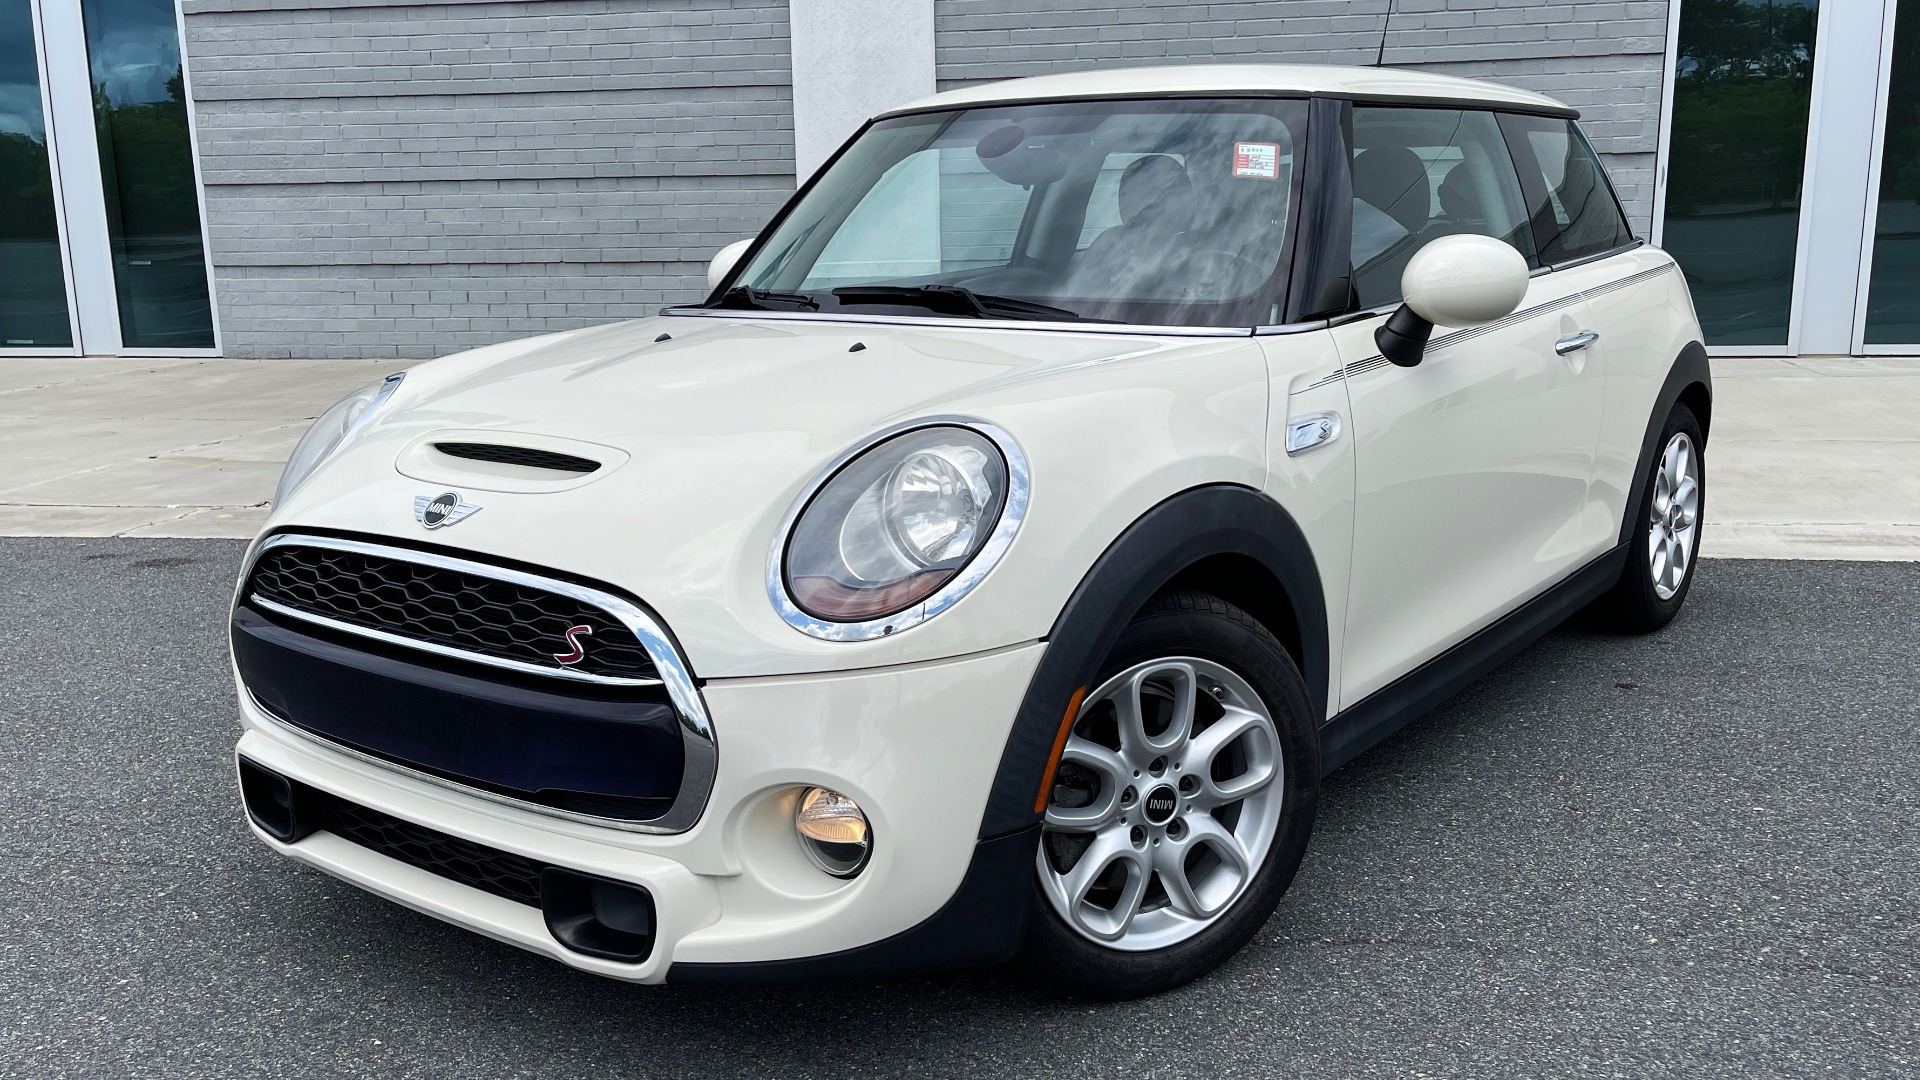 Used 2015 MINI COOPER HARDTOP S 2DR / 2.0L TURBO / FWD / 6-SPD MANUAL for sale Sold at Formula Imports in Charlotte NC 28227 1